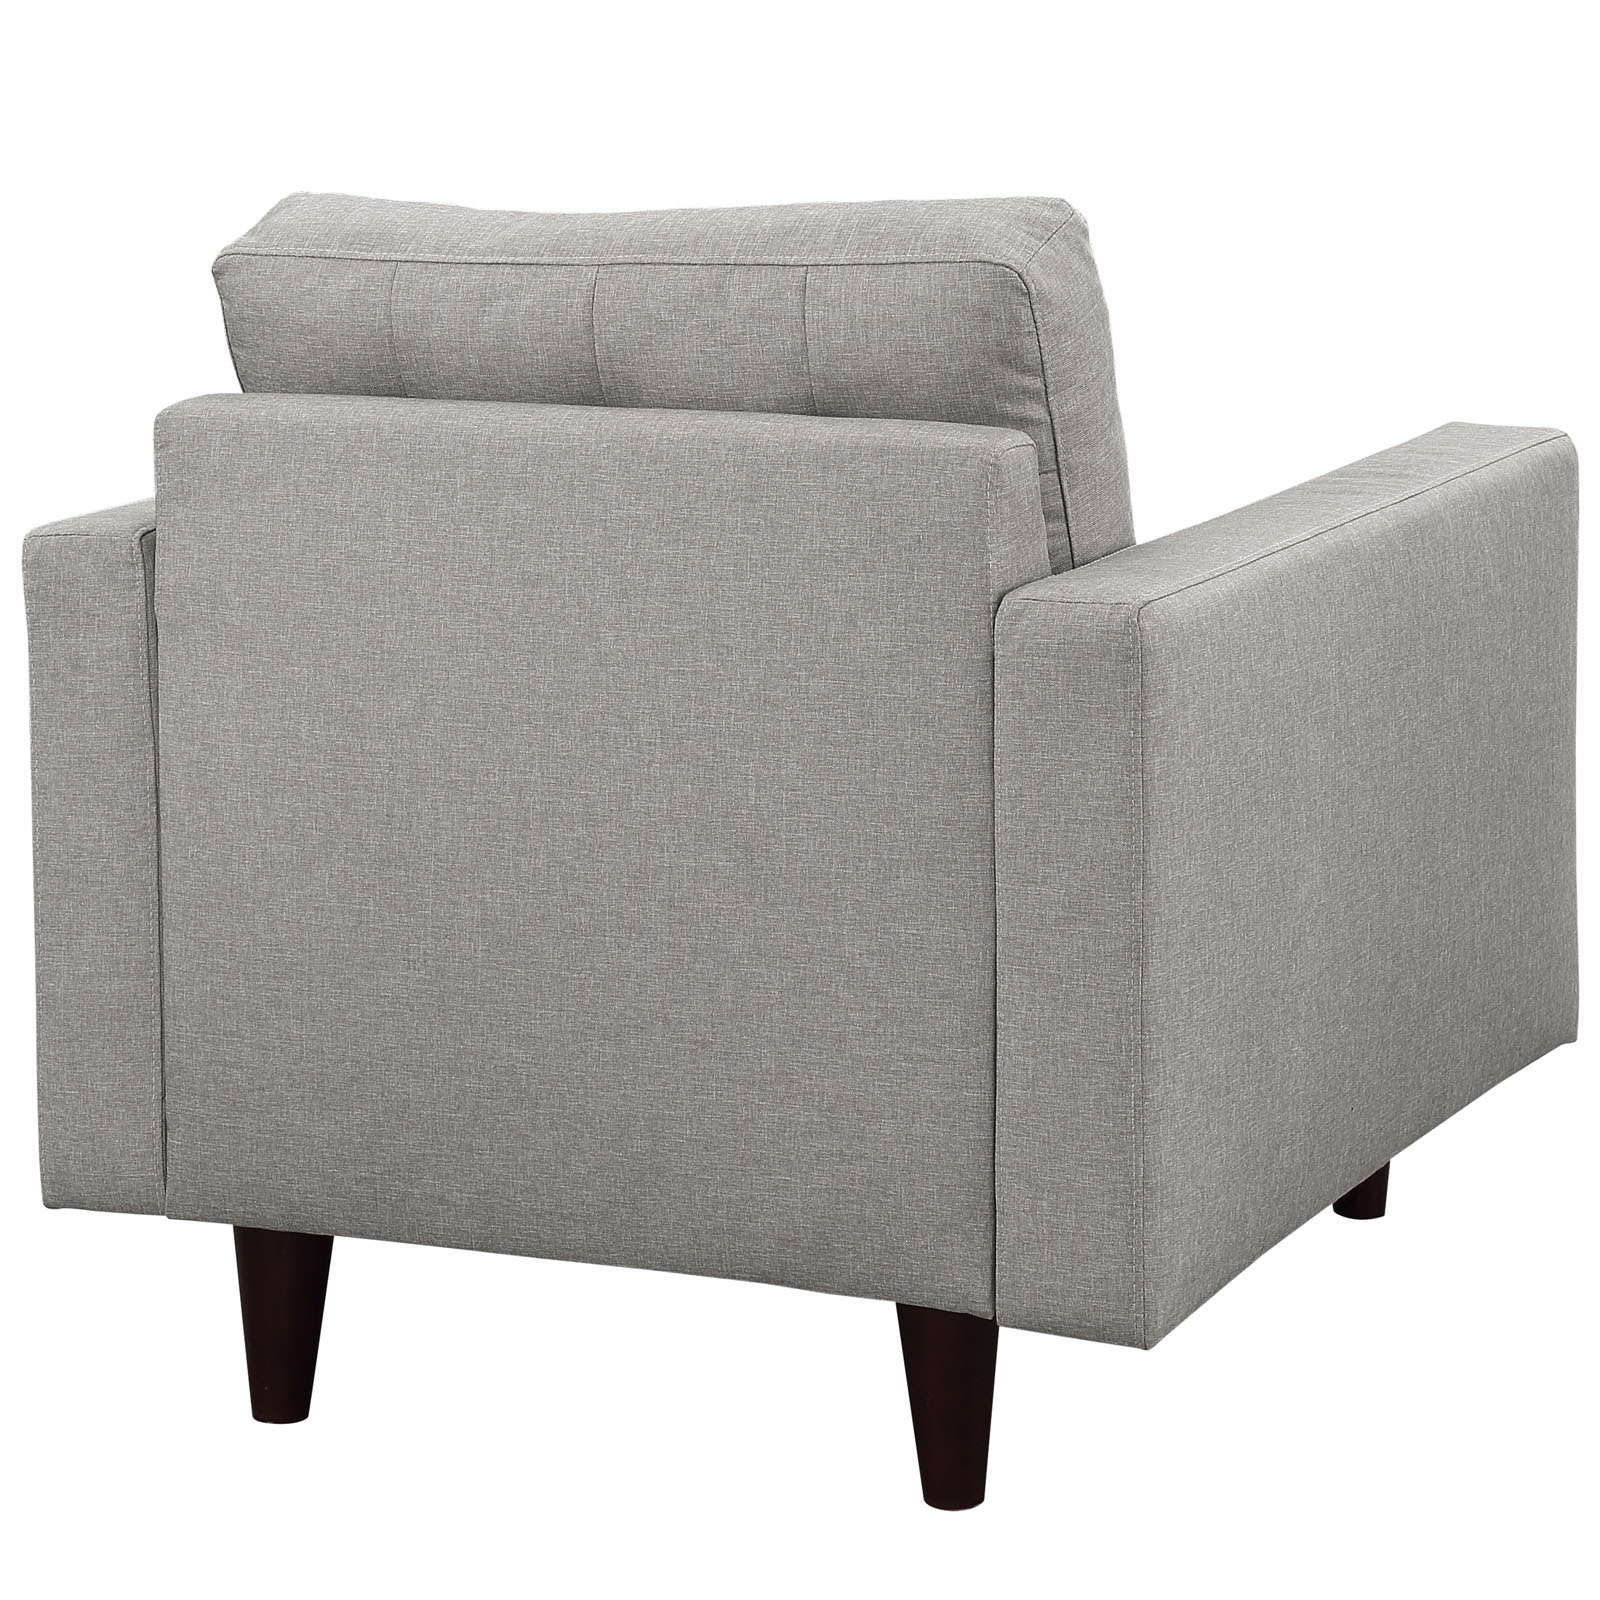 Modway Empress Upholstered Fabric Armchair in Light Gray - image 5 of 5